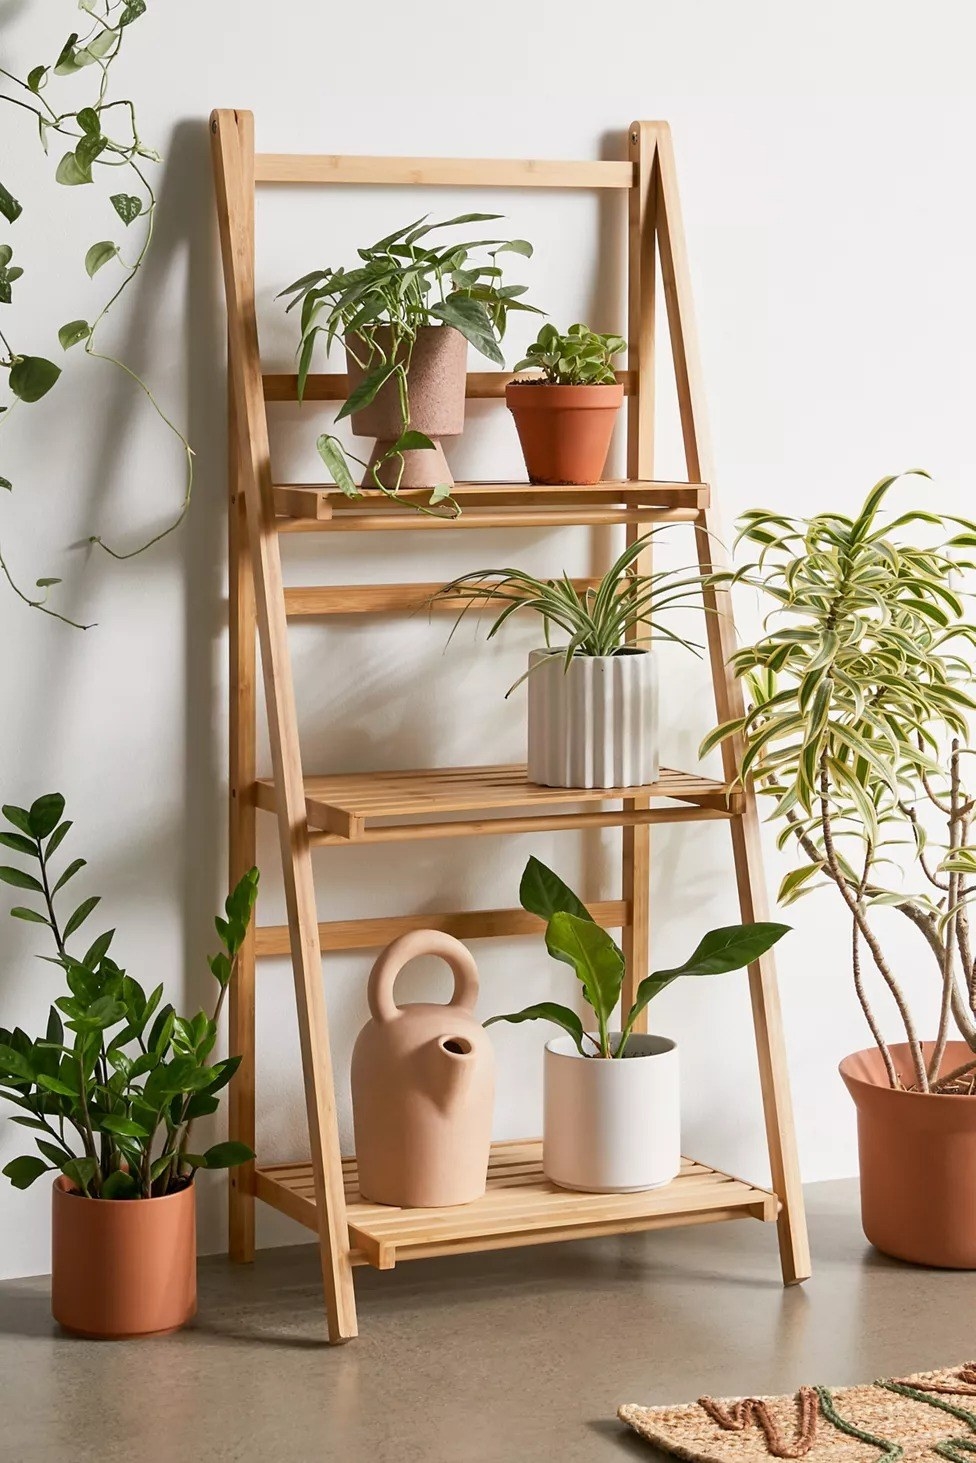 the ladder shelf with plants on it